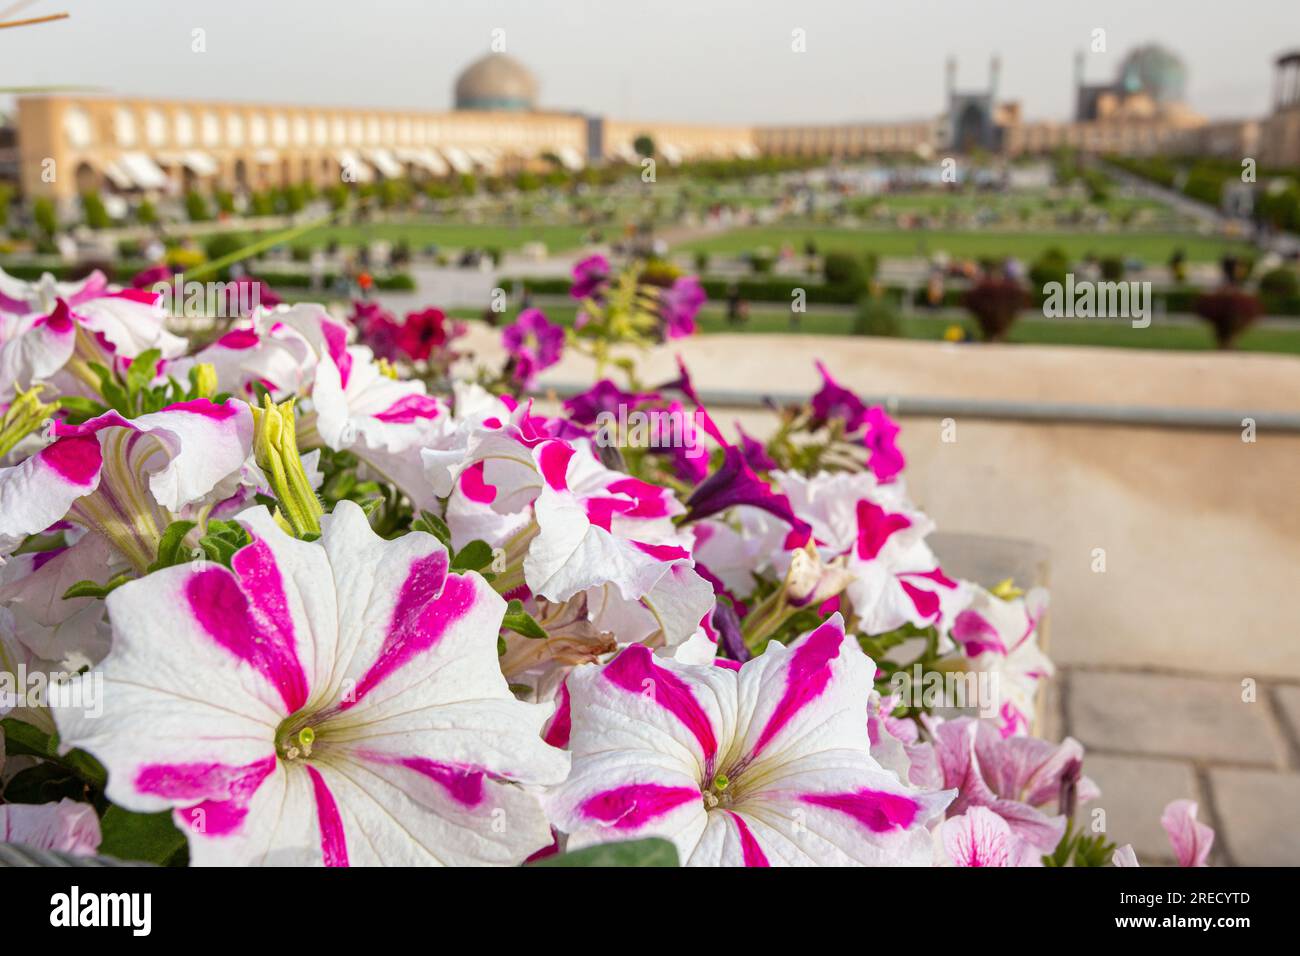 Petunia flowers bloom in Naqsh-e Jahan Square in Central Isfahan, Iran Stock Photo